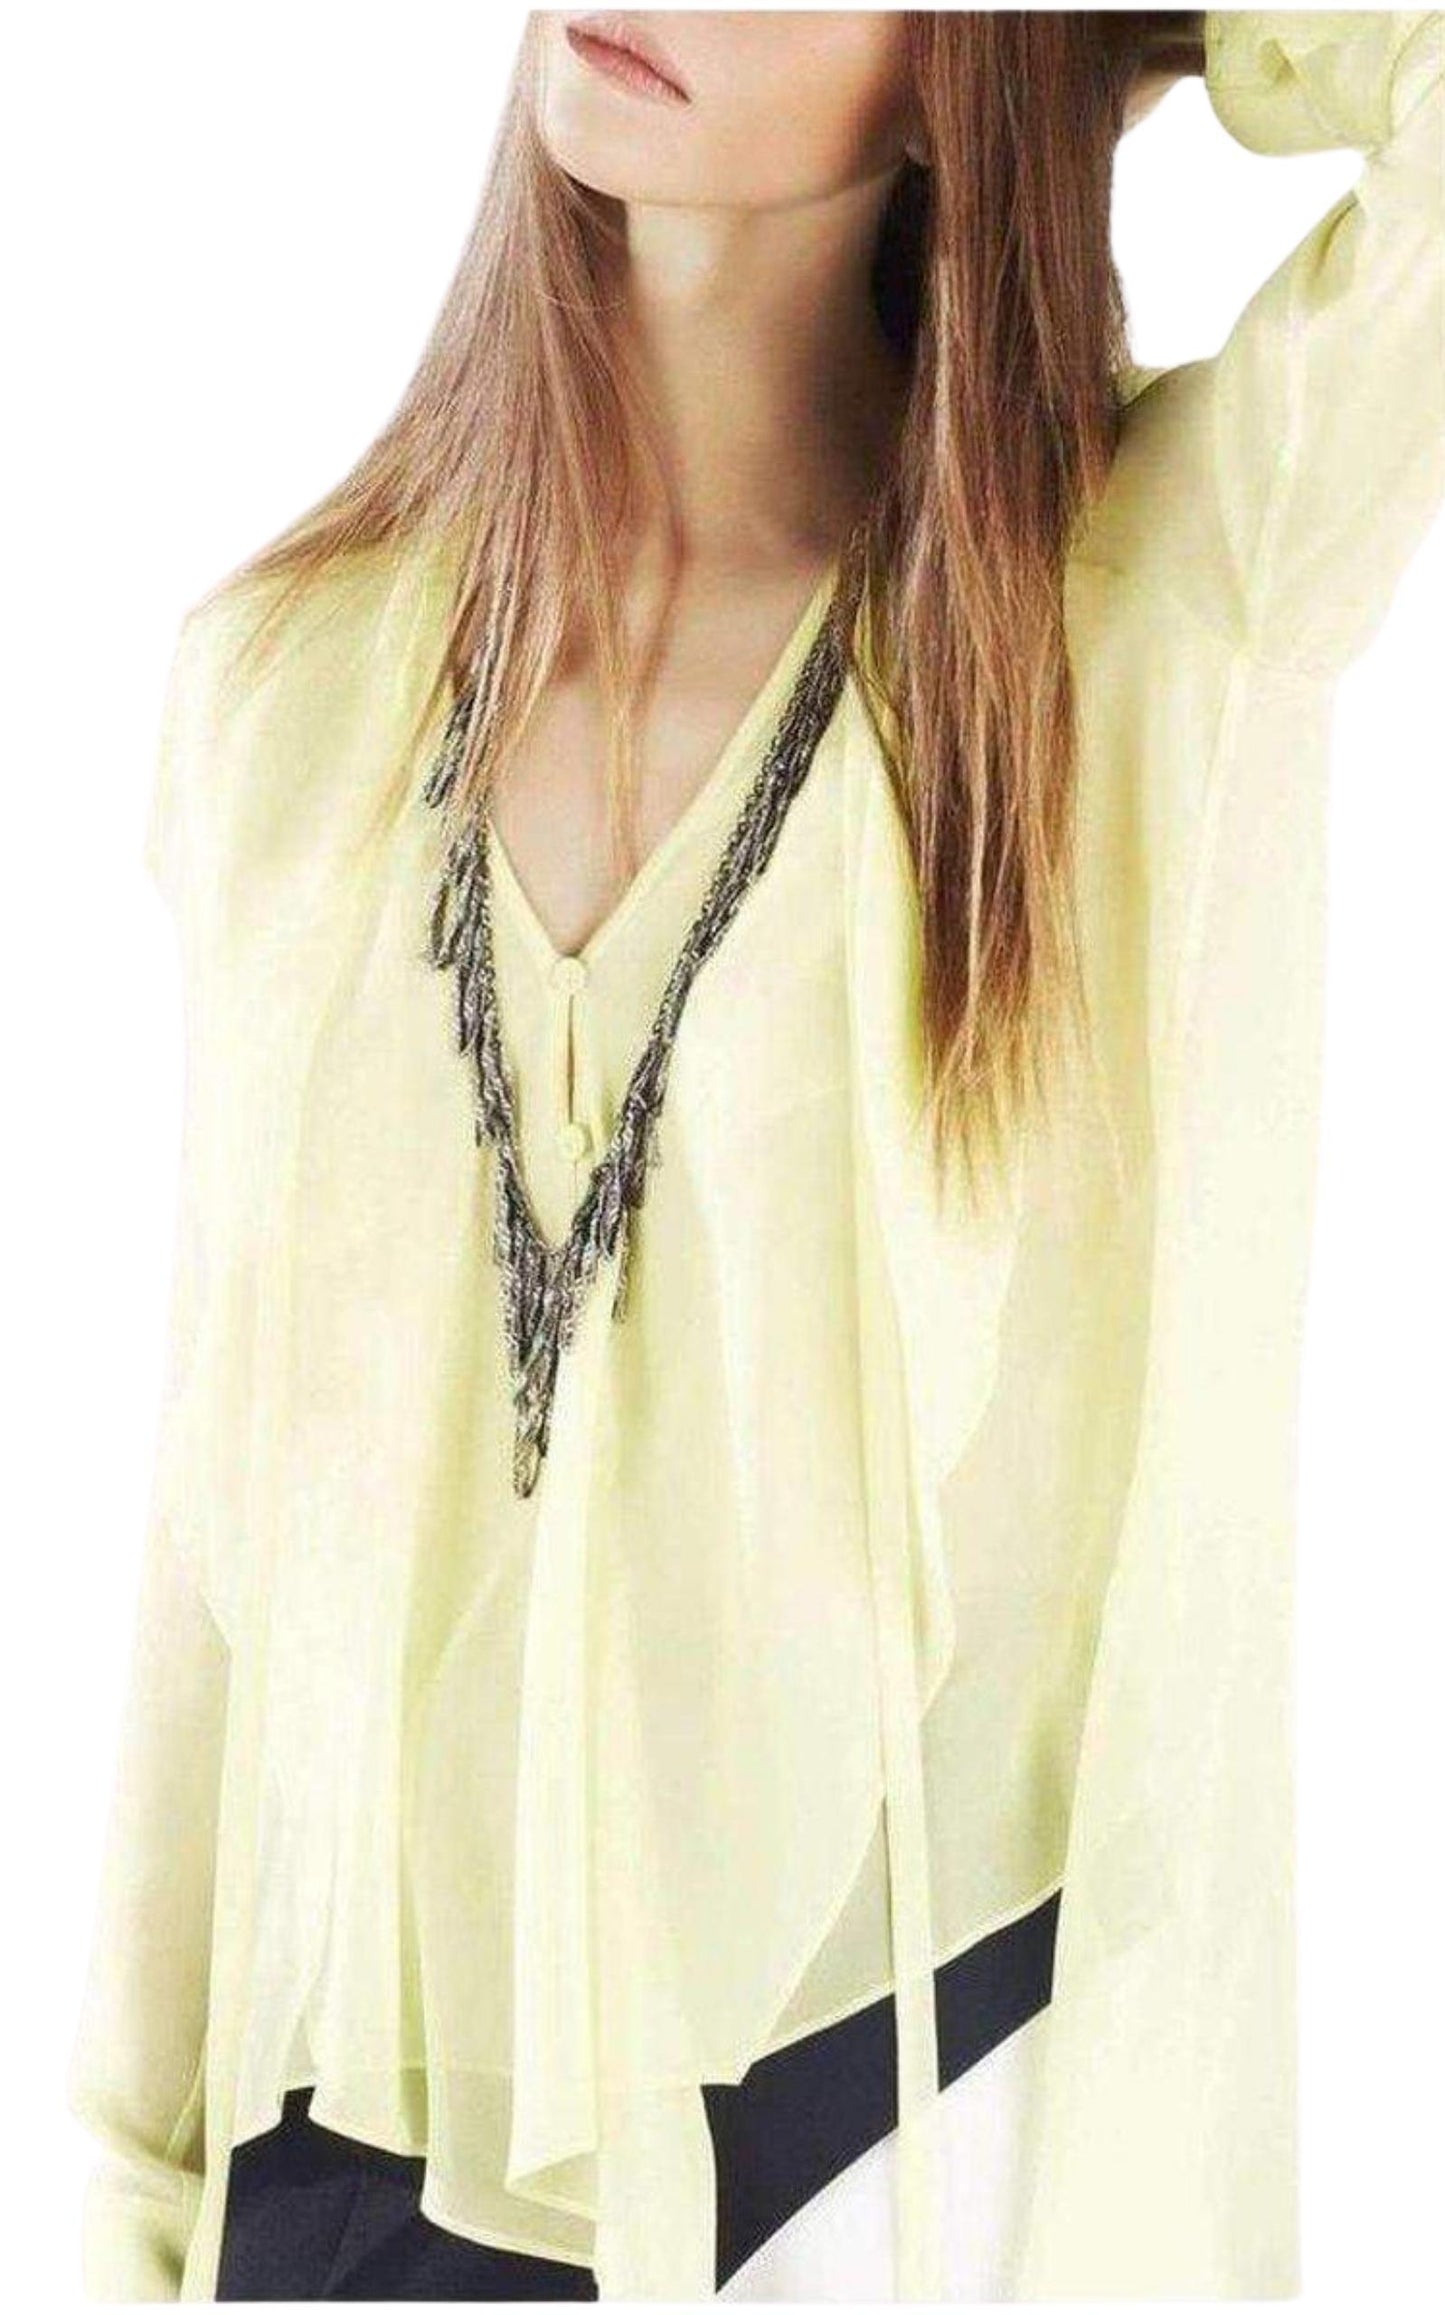  BCBGMAXAZRIALooped Chained Necklace - Runway Catalog